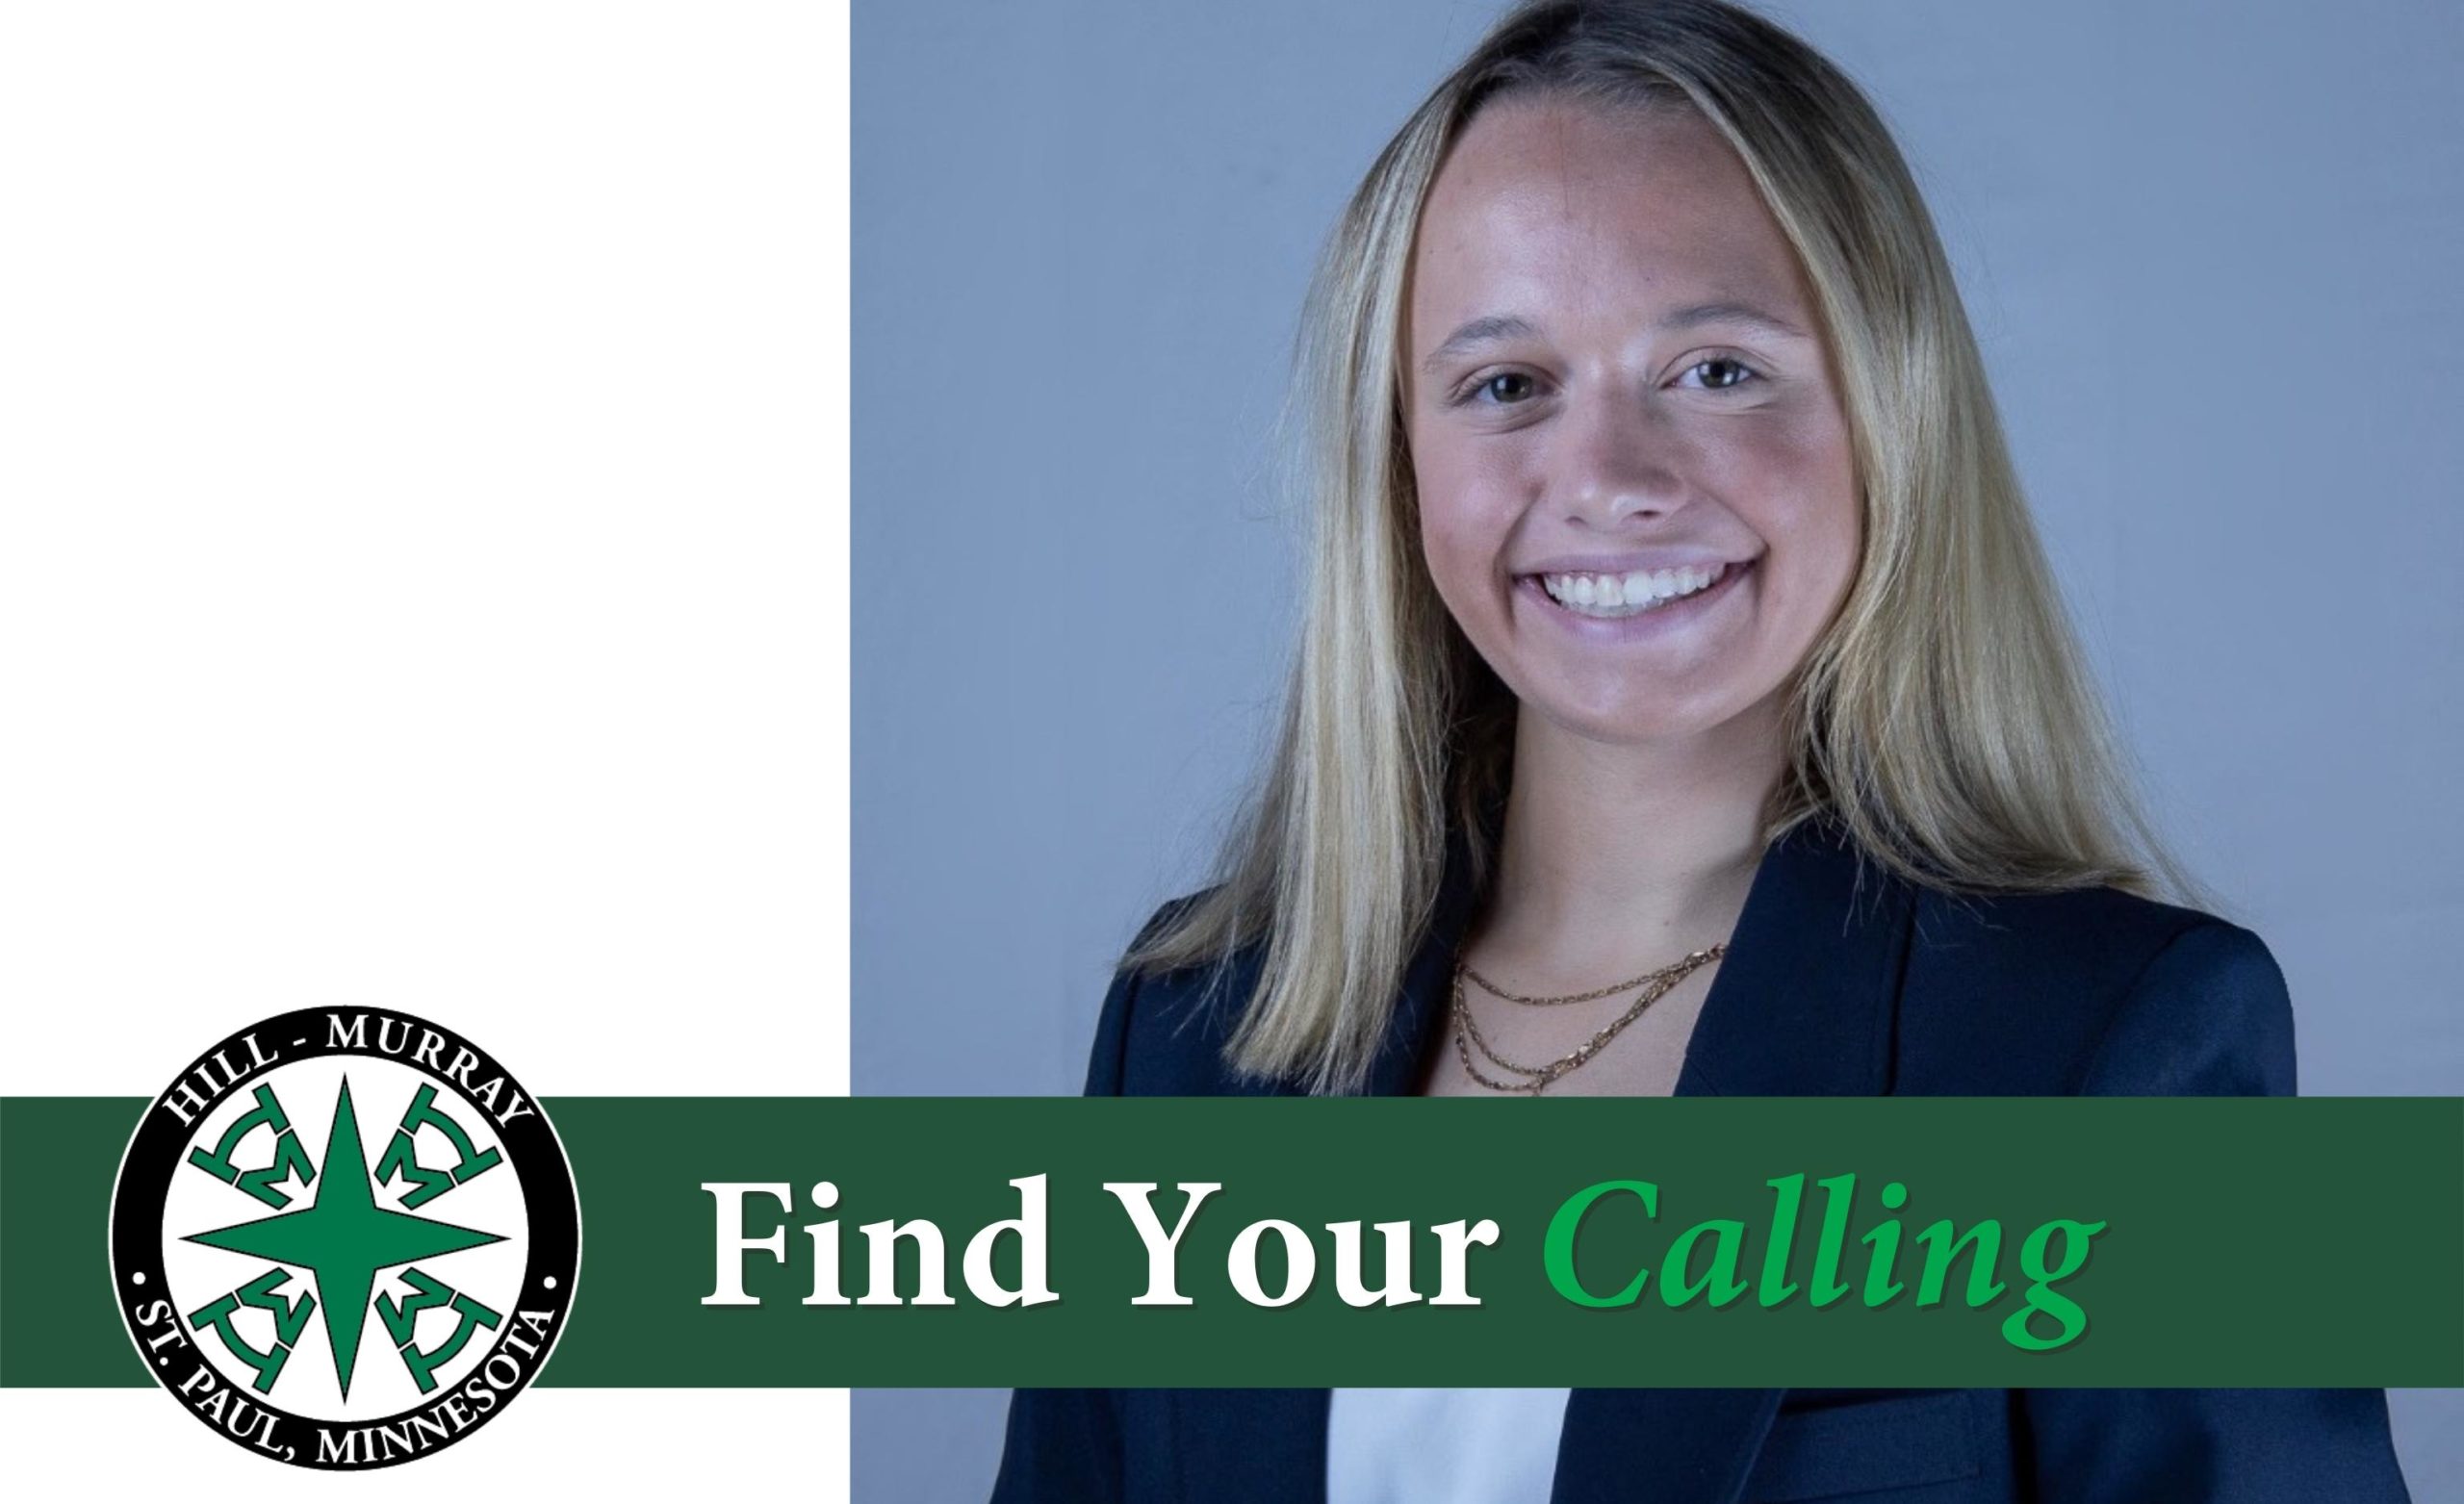 Find Your Calling: Anna Schafhauser pursues business and finds community at HM 